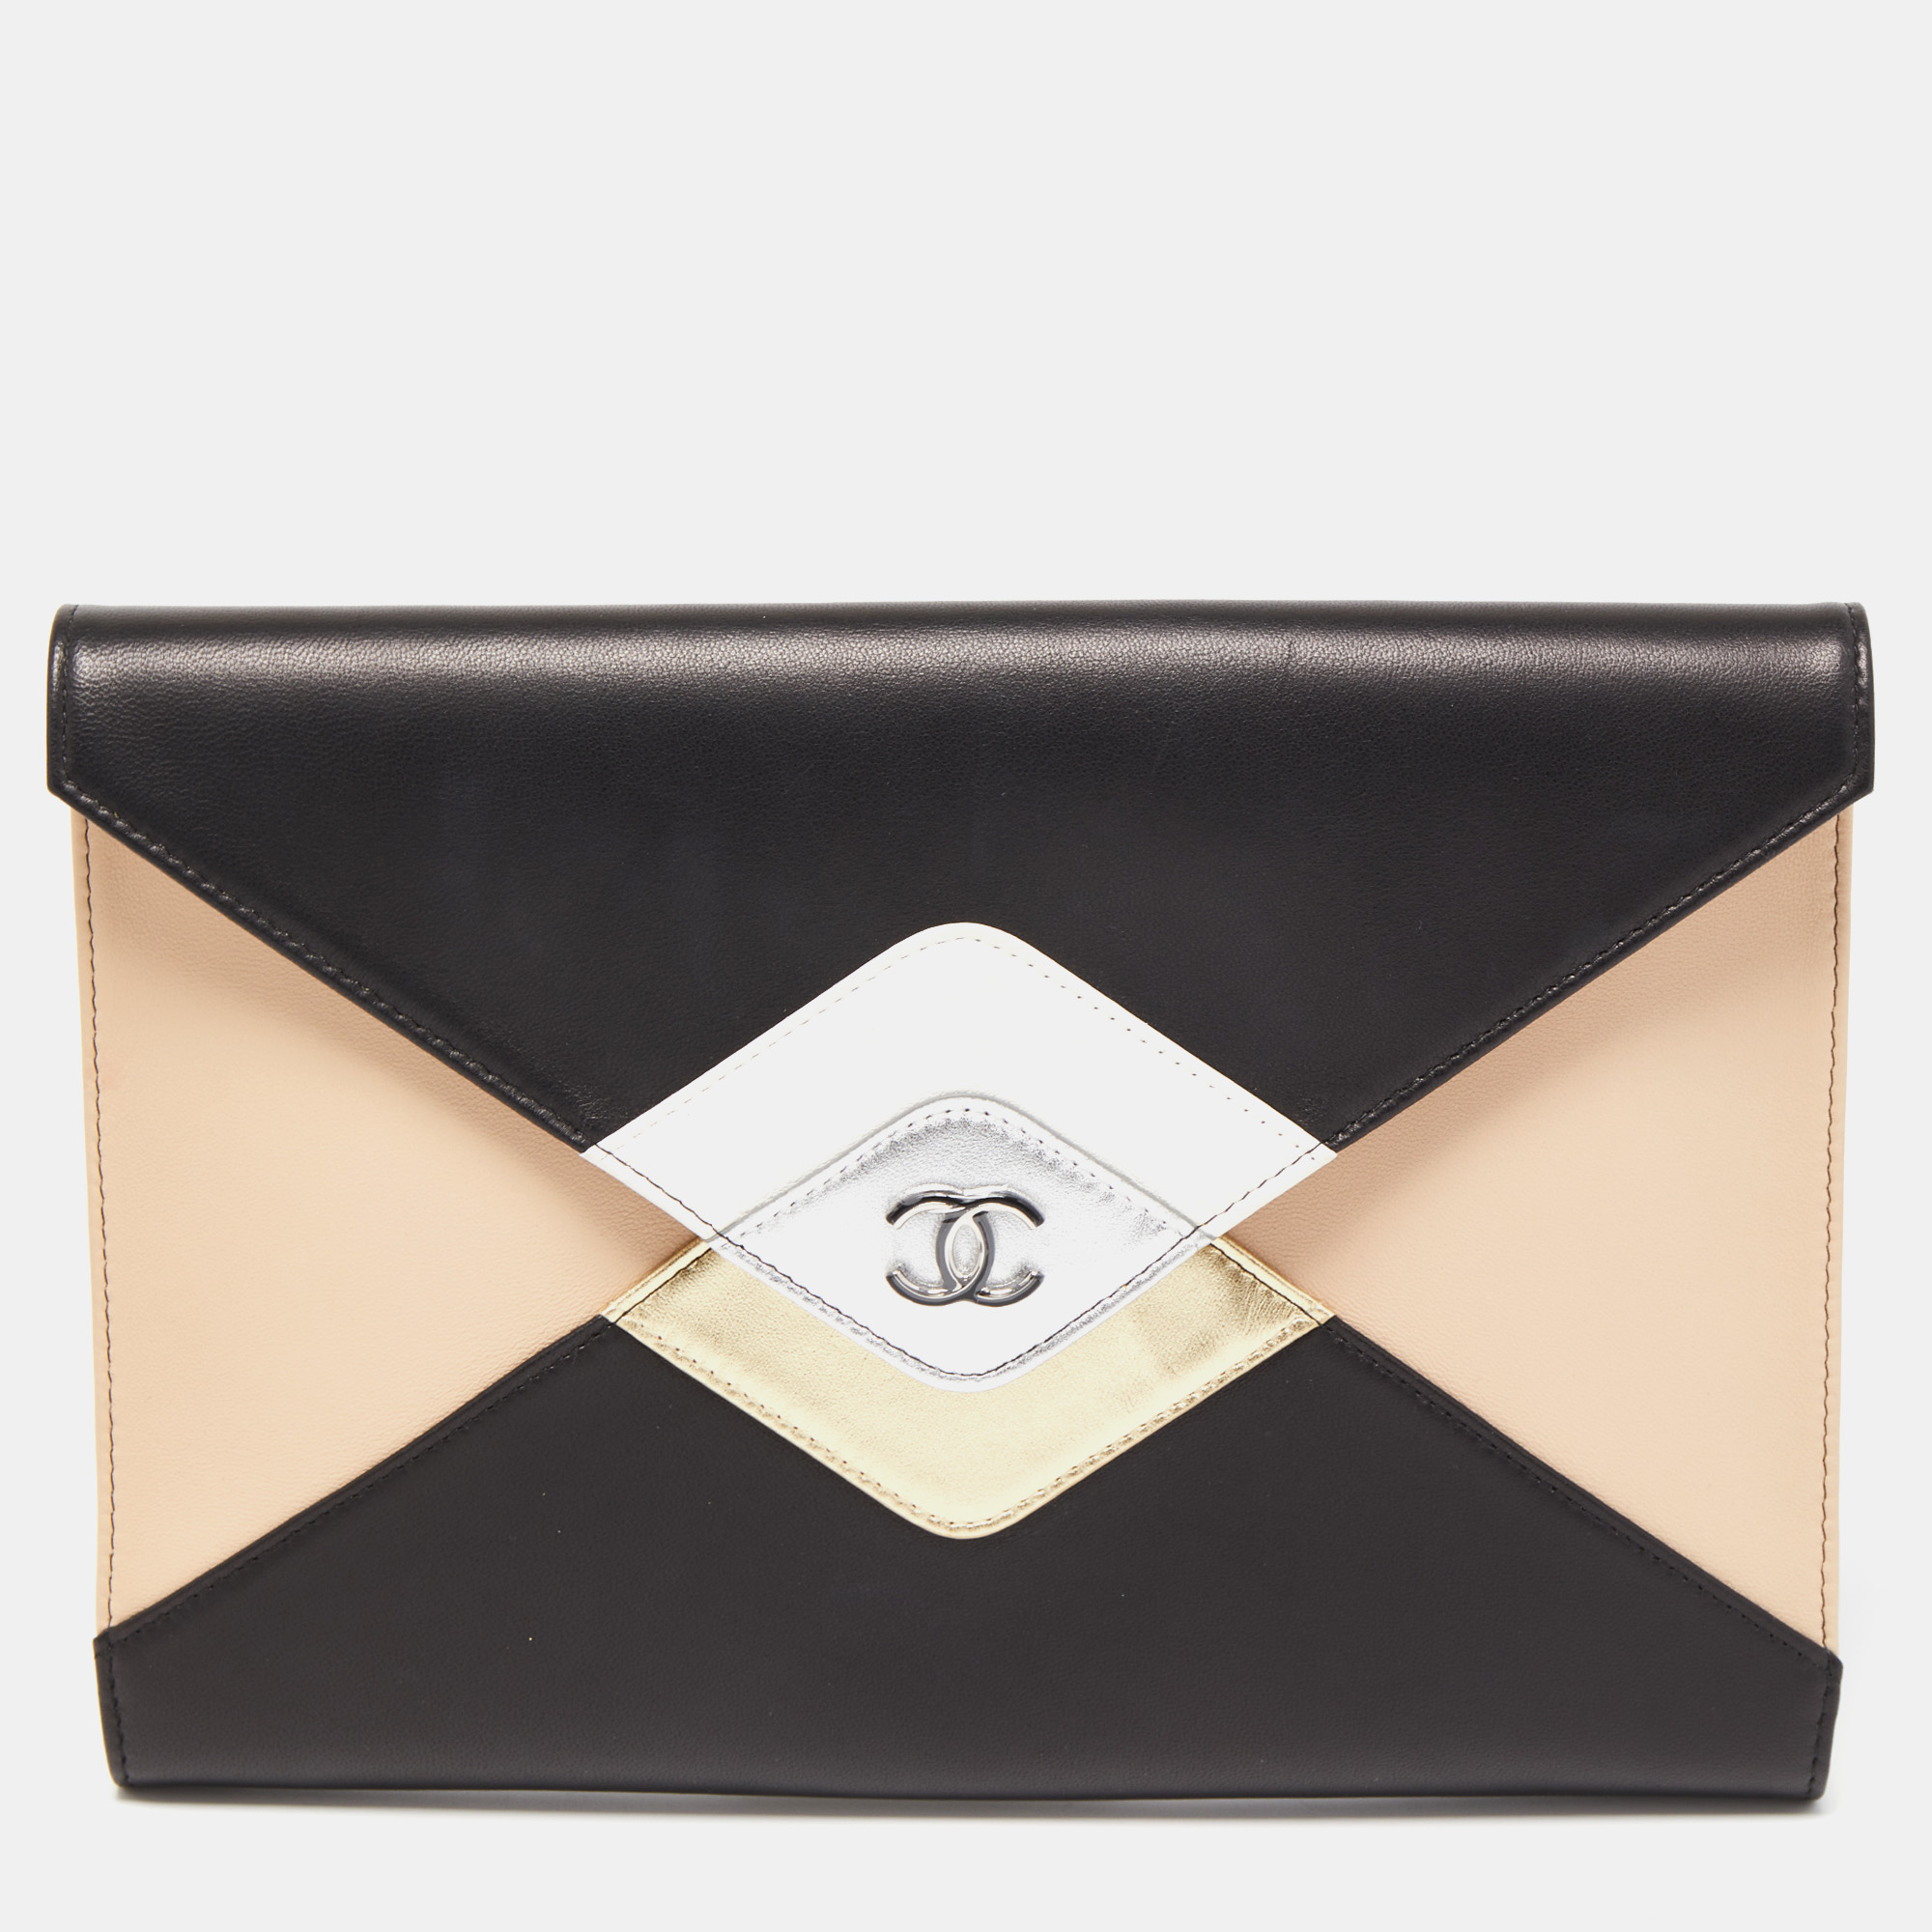 Pre-owned Chanel Multicolor Leather Cc Clutch